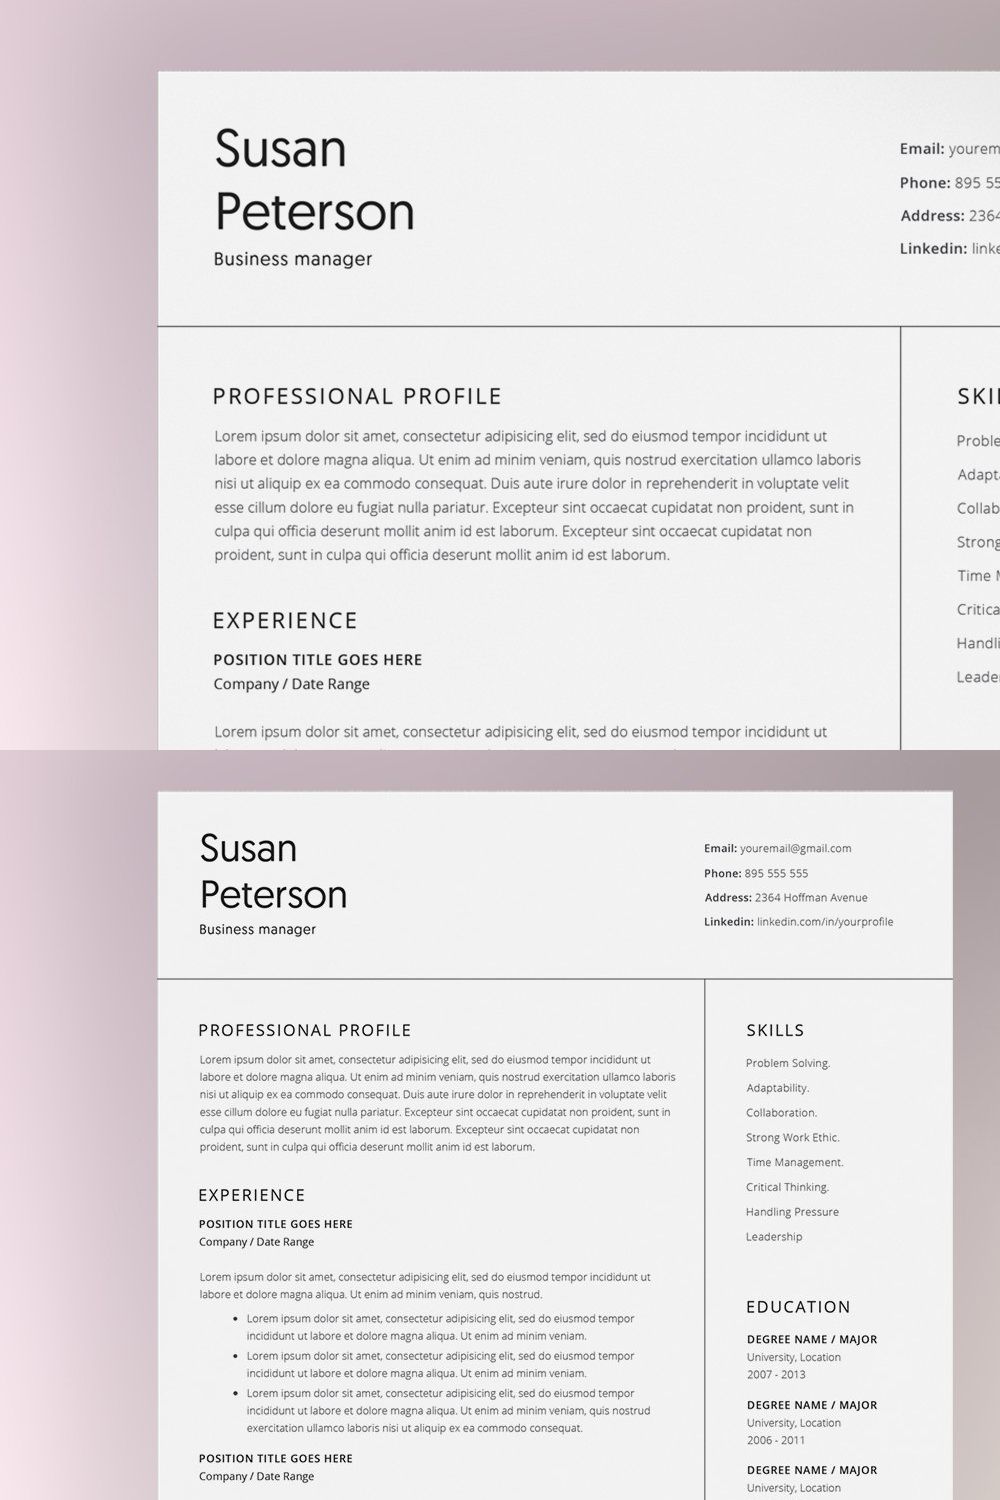 Resume | Cover Letter | 4 Pages pinterest preview image.